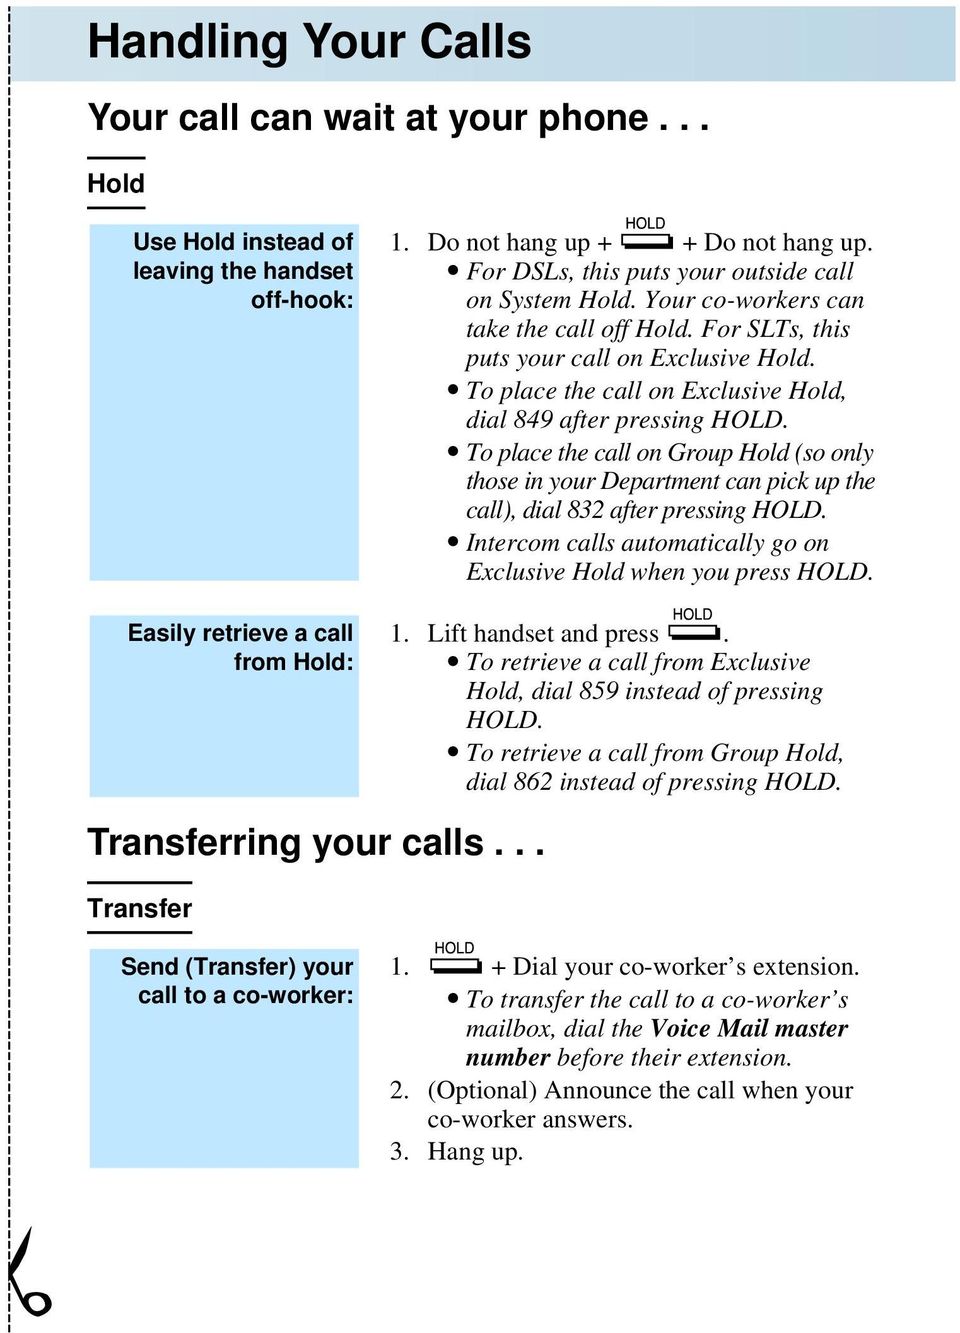 To place the call on Exclusive Hold, dial 849 after pressing HOLD. To place the call on Group Hold (so only those in your Department can pick up the call), dial 832 after pressing HOLD.